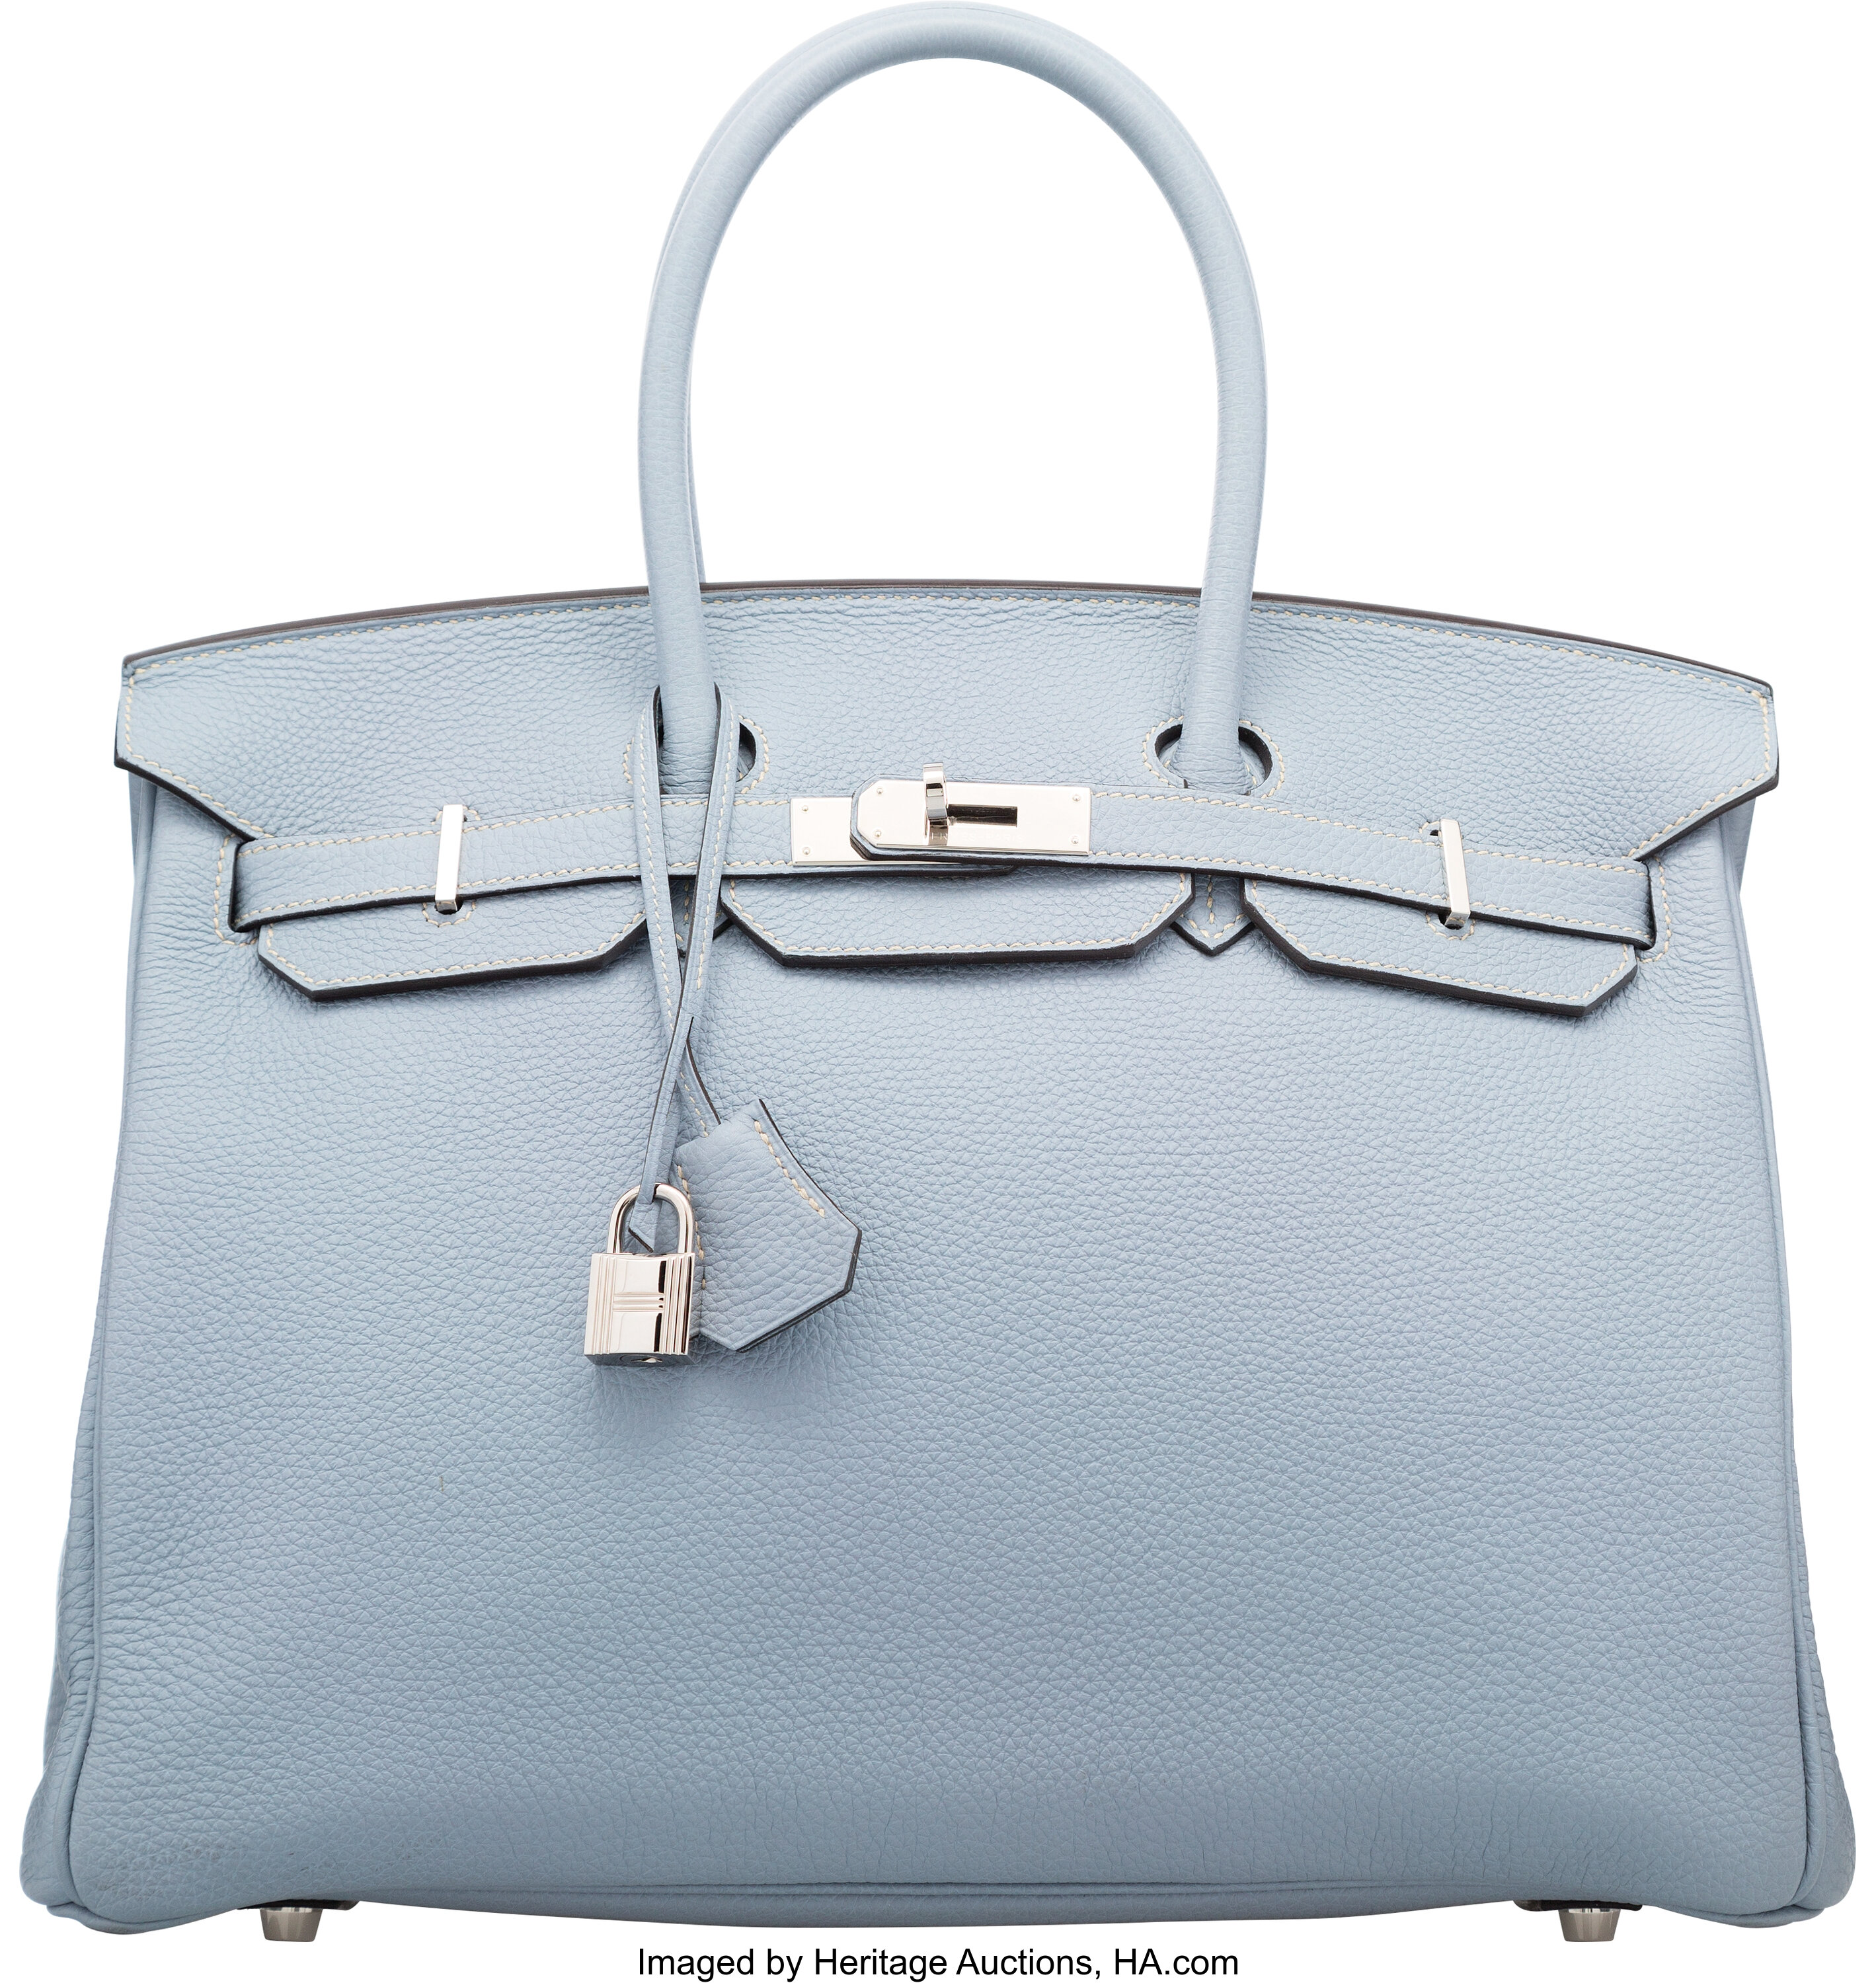 HERMES Birkin Size 25 Pearl Grey Togo Leather– GALLERY RARE Global Online  Store